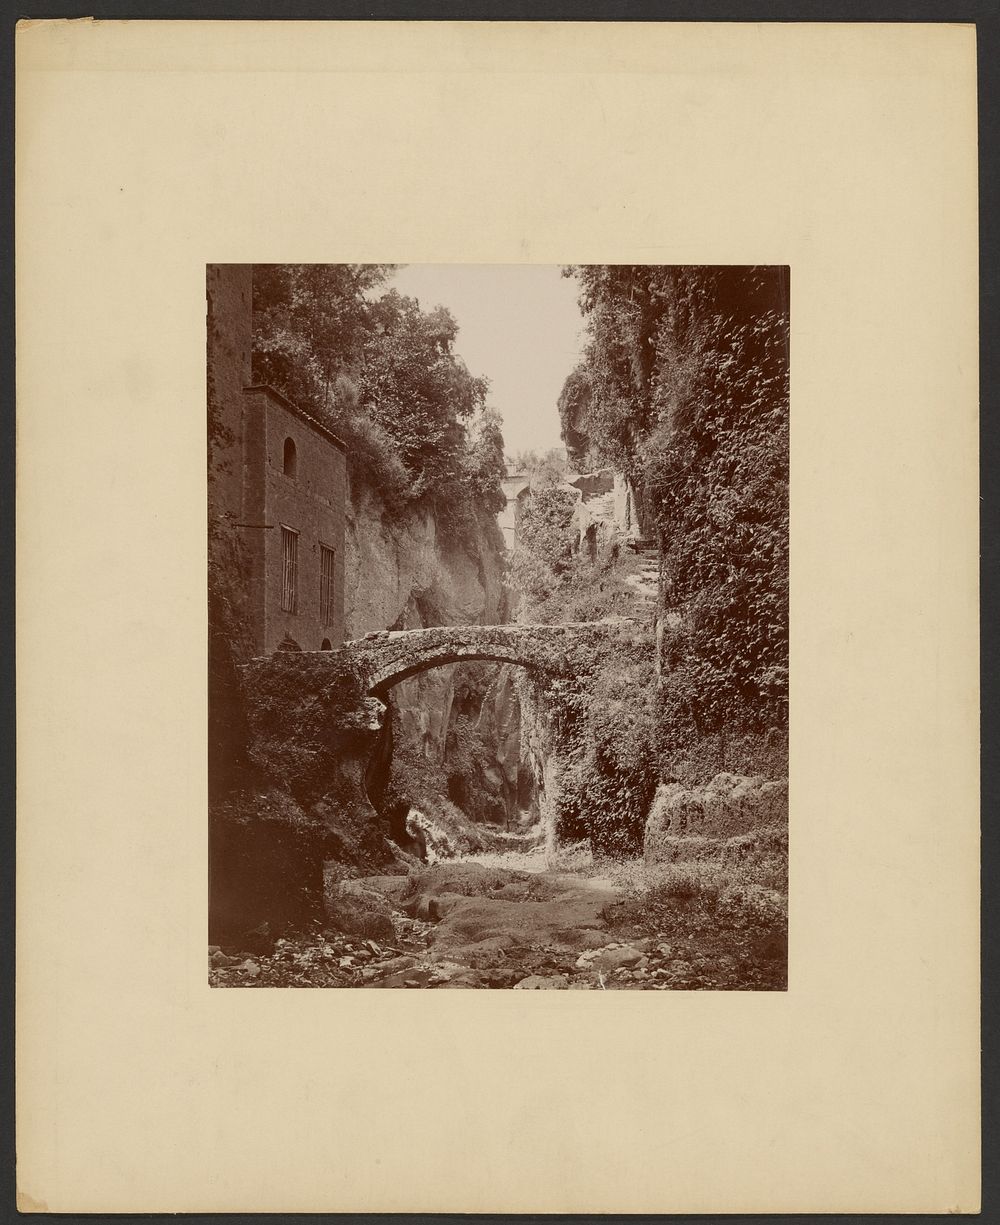 View of an antique bridge in Italy by Gaetano Pedo